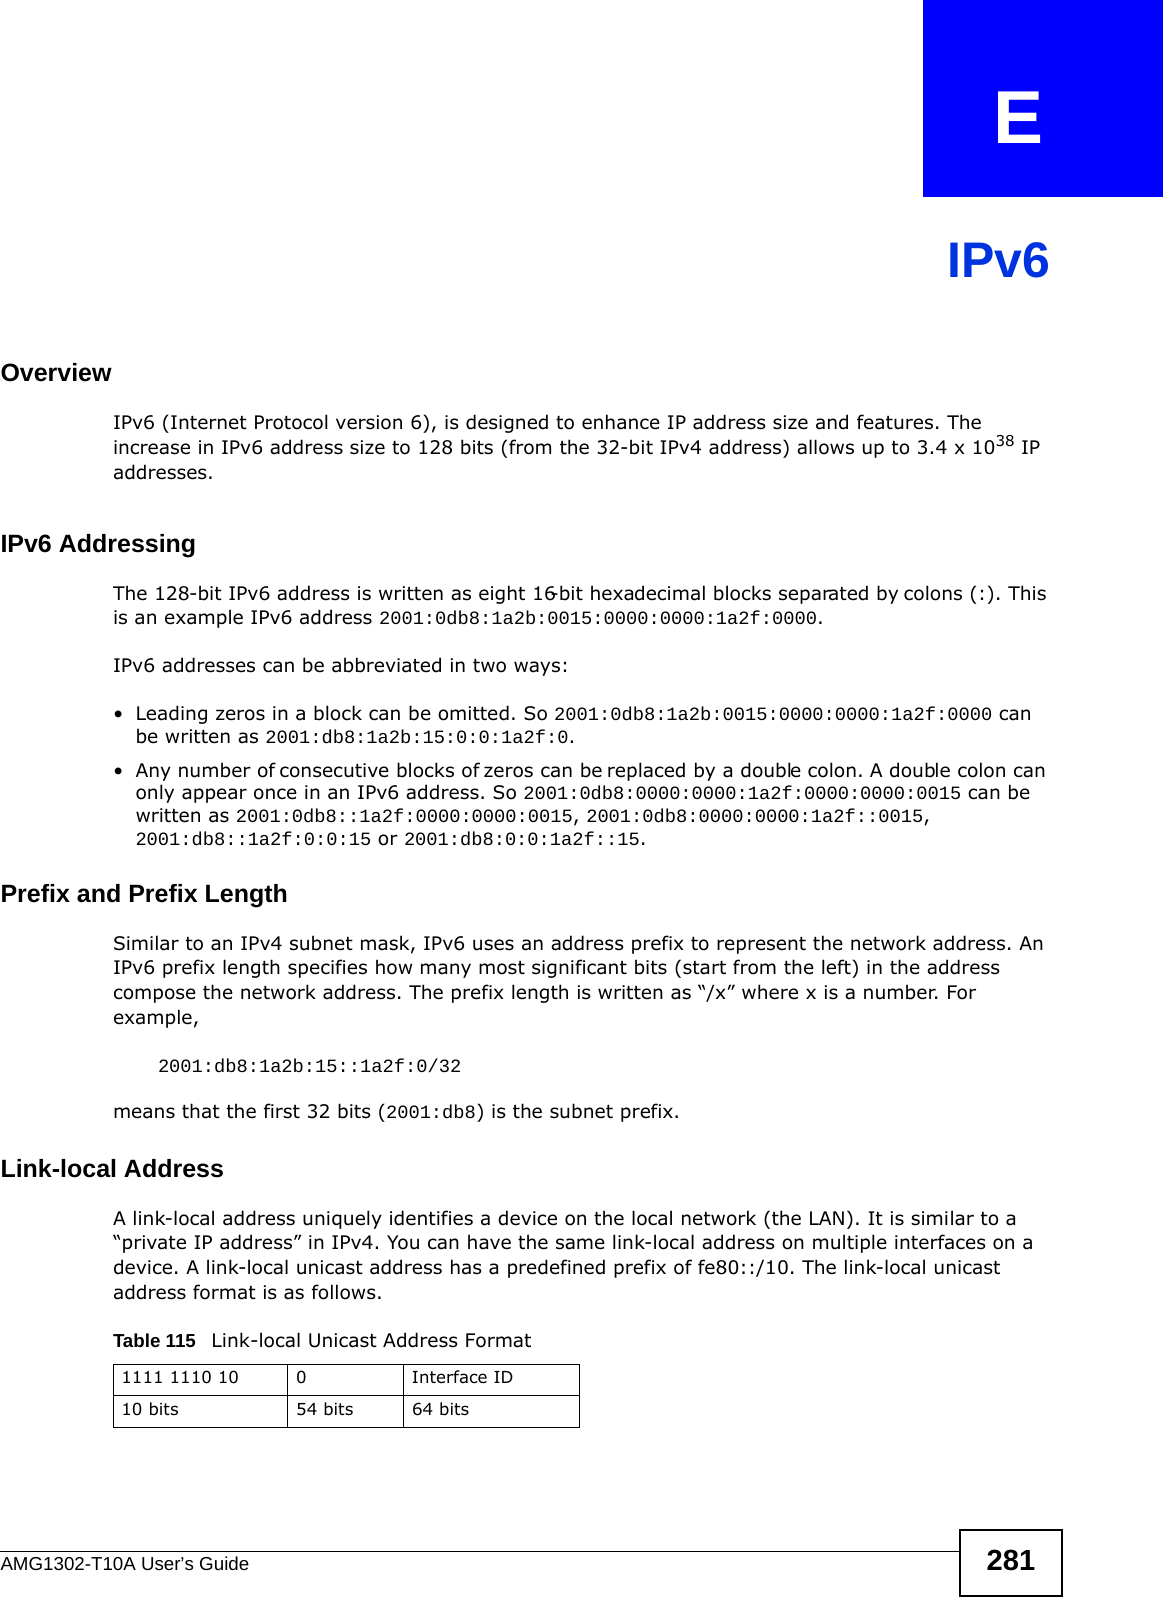 AMG1302-T10A User’s Guide 281APPENDIX   EIPv6OverviewIPv6 (Internet Protocol version 6), is designed to enhance IP address size and features. The increase in IPv6 address size to 128 bits (from the 32-bit IPv4 address) allows up to 3.4 x 1038 IP addresses. IPv6 AddressingThe 128-bit IPv6 address is written as eight 16-bit hexadecimal blocks separated by colons (:). This is an example IPv6 address 2001:0db8:1a2b:0015:0000:0000:1a2f:0000. IPv6 addresses can be abbreviated in two ways:• Leading zeros in a block can be omitted. So 2001:0db8:1a2b:0015:0000:0000:1a2f:0000 can be written as 2001:db8:1a2b:15:0:0:1a2f:0. • Any number of consecutive blocks of zeros can be replaced by a double colon. A double colon can only appear once in an IPv6 address. So 2001:0db8:0000:0000:1a2f:0000:0000:0015 can be written as 2001:0db8::1a2f:0000:0000:0015, 2001:0db8:0000:0000:1a2f::0015, 2001:db8::1a2f:0:0:15 or 2001:db8:0:0:1a2f::15.Prefix and Prefix LengthSimilar to an IPv4 subnet mask, IPv6 uses an address prefix to represent the network address. An IPv6 prefix length specifies how many most significant bits (start from the left) in the address compose the network address. The prefix length is written as “/x” where x is a number. For example, 2001:db8:1a2b:15::1a2f:0/32means that the first 32 bits (2001:db8) is the subnet prefix. Link-local AddressA link-local address uniquely identifies a device on the local network (the LAN). It is similar to a “private IP address” in IPv4. You can have the same link-local address on multiple interfaces on a device. A link-local unicast address has a predefined prefix of fe80::/10. The link-local unicast address format is as follows.Table 115   Link-local Unicast Address Format1111 1110 10 0 Interface ID10 bits 54 bits 64 bits